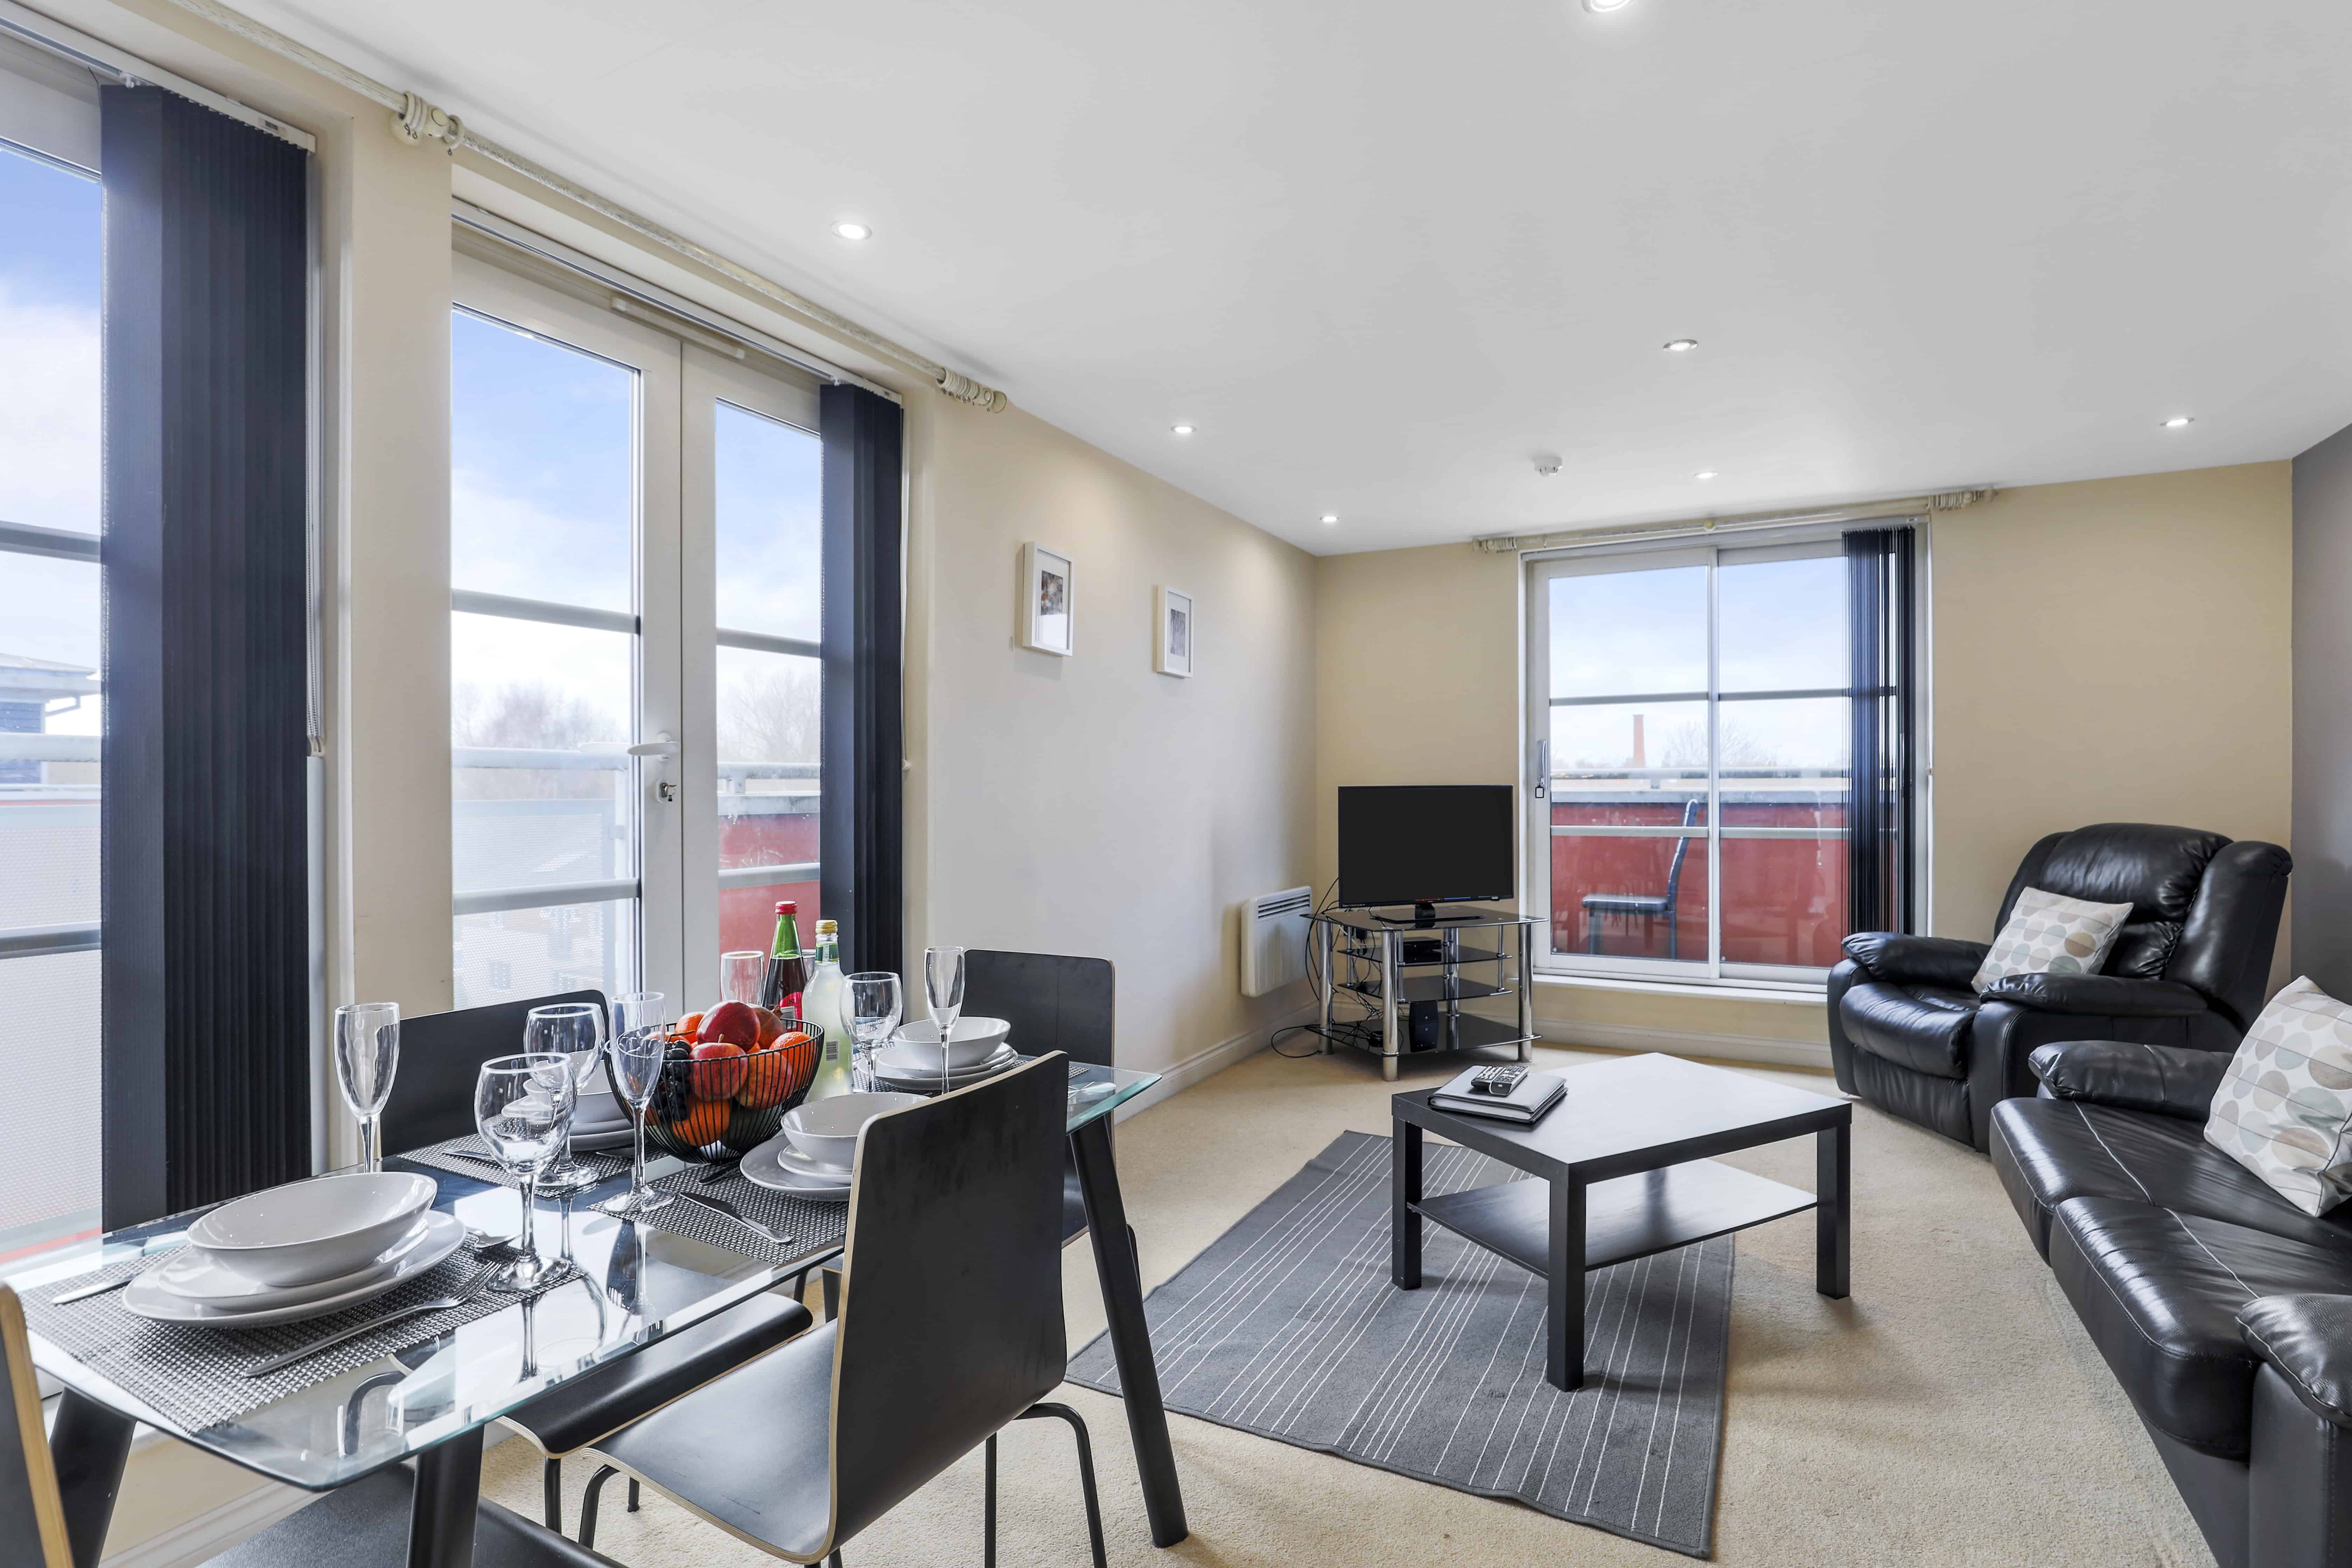 Freemen's Meadow Serviced Apartments Leicester